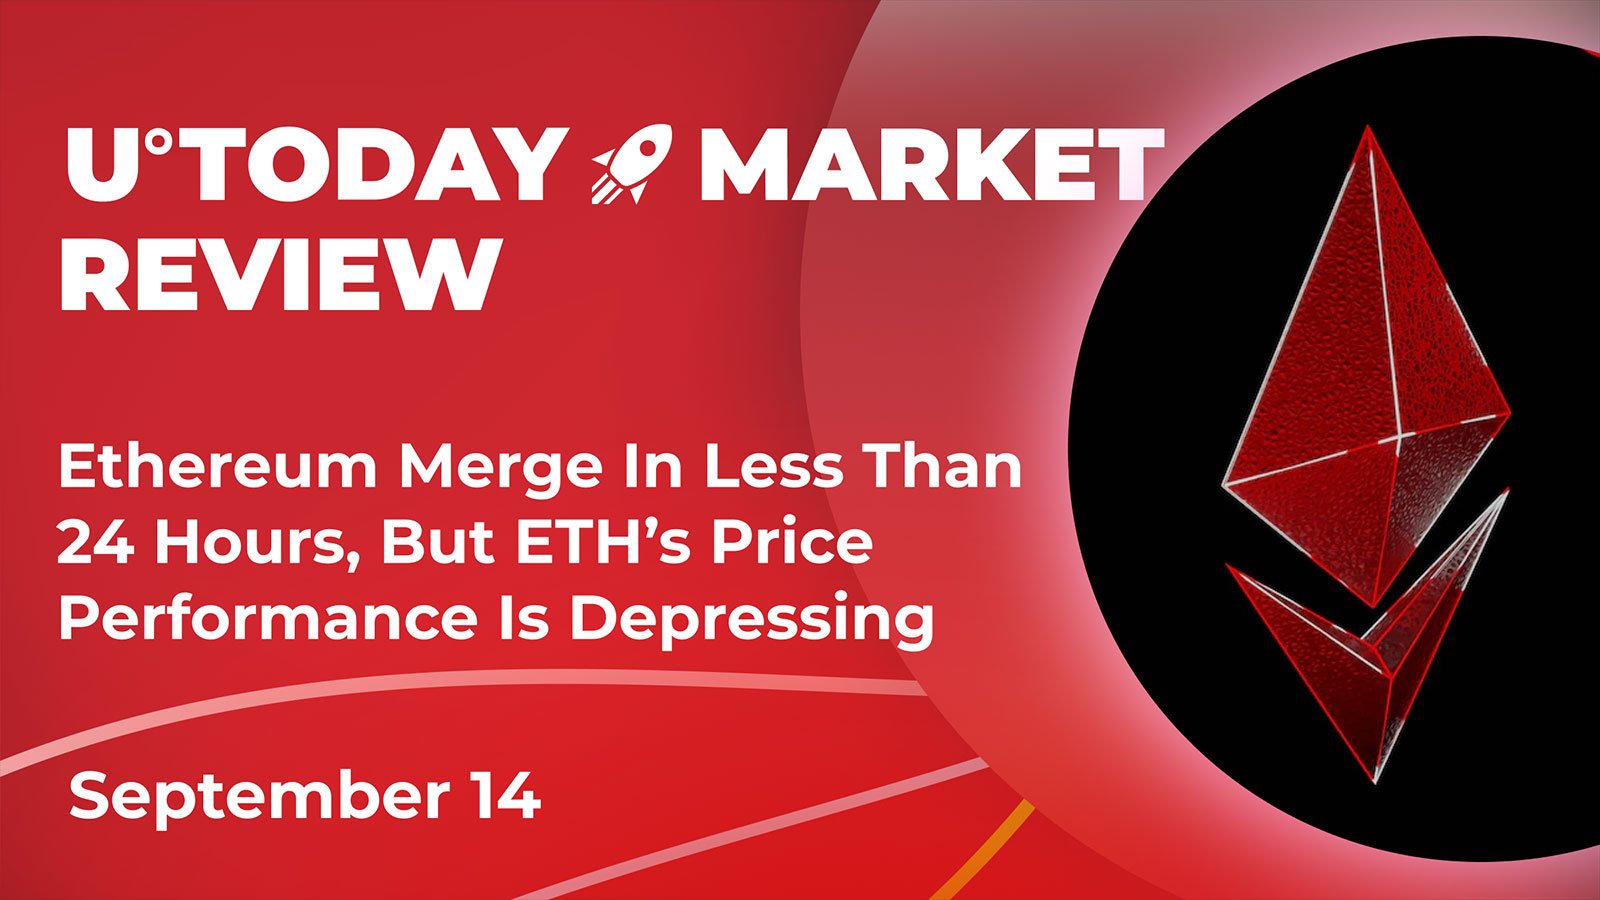 Ethereum Merge in Less Than 24 Hours, But ETH's Price Performance Is Depressing: Crypto Market Review, September 14